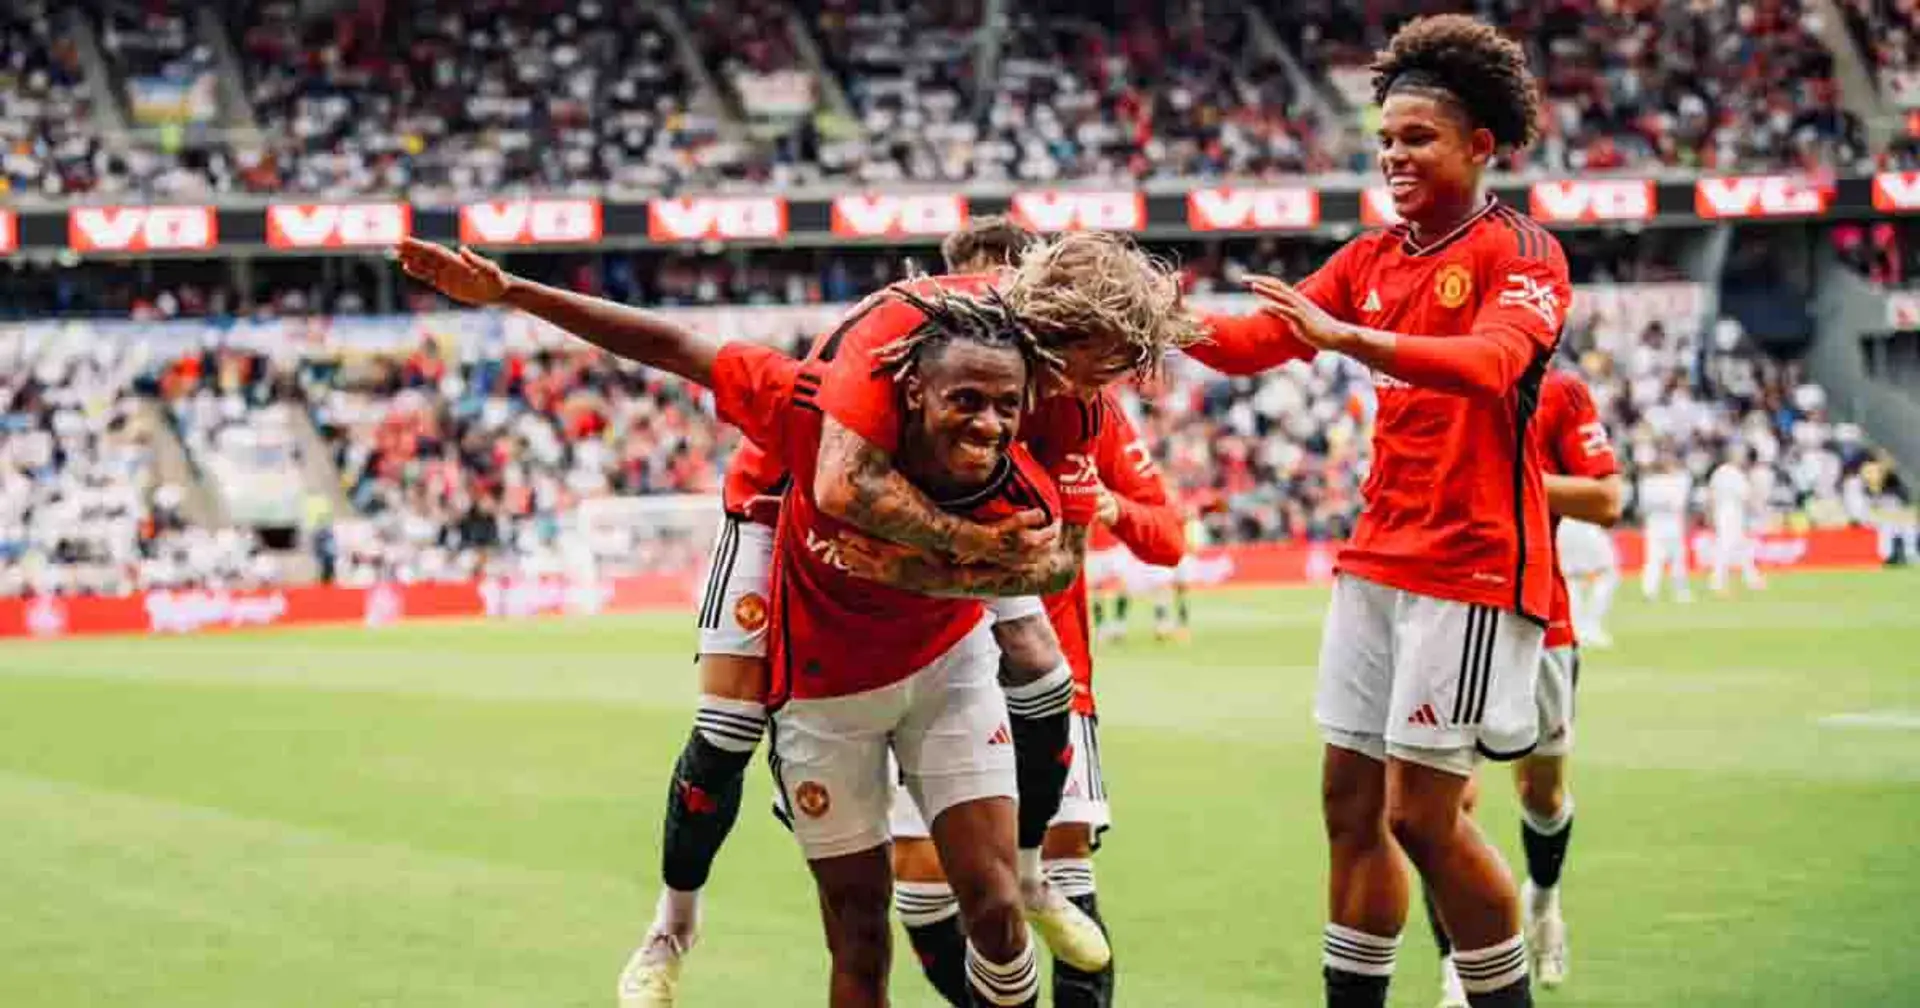 Mount – 8, Sancho – 5: rating Man United players in Leeds win